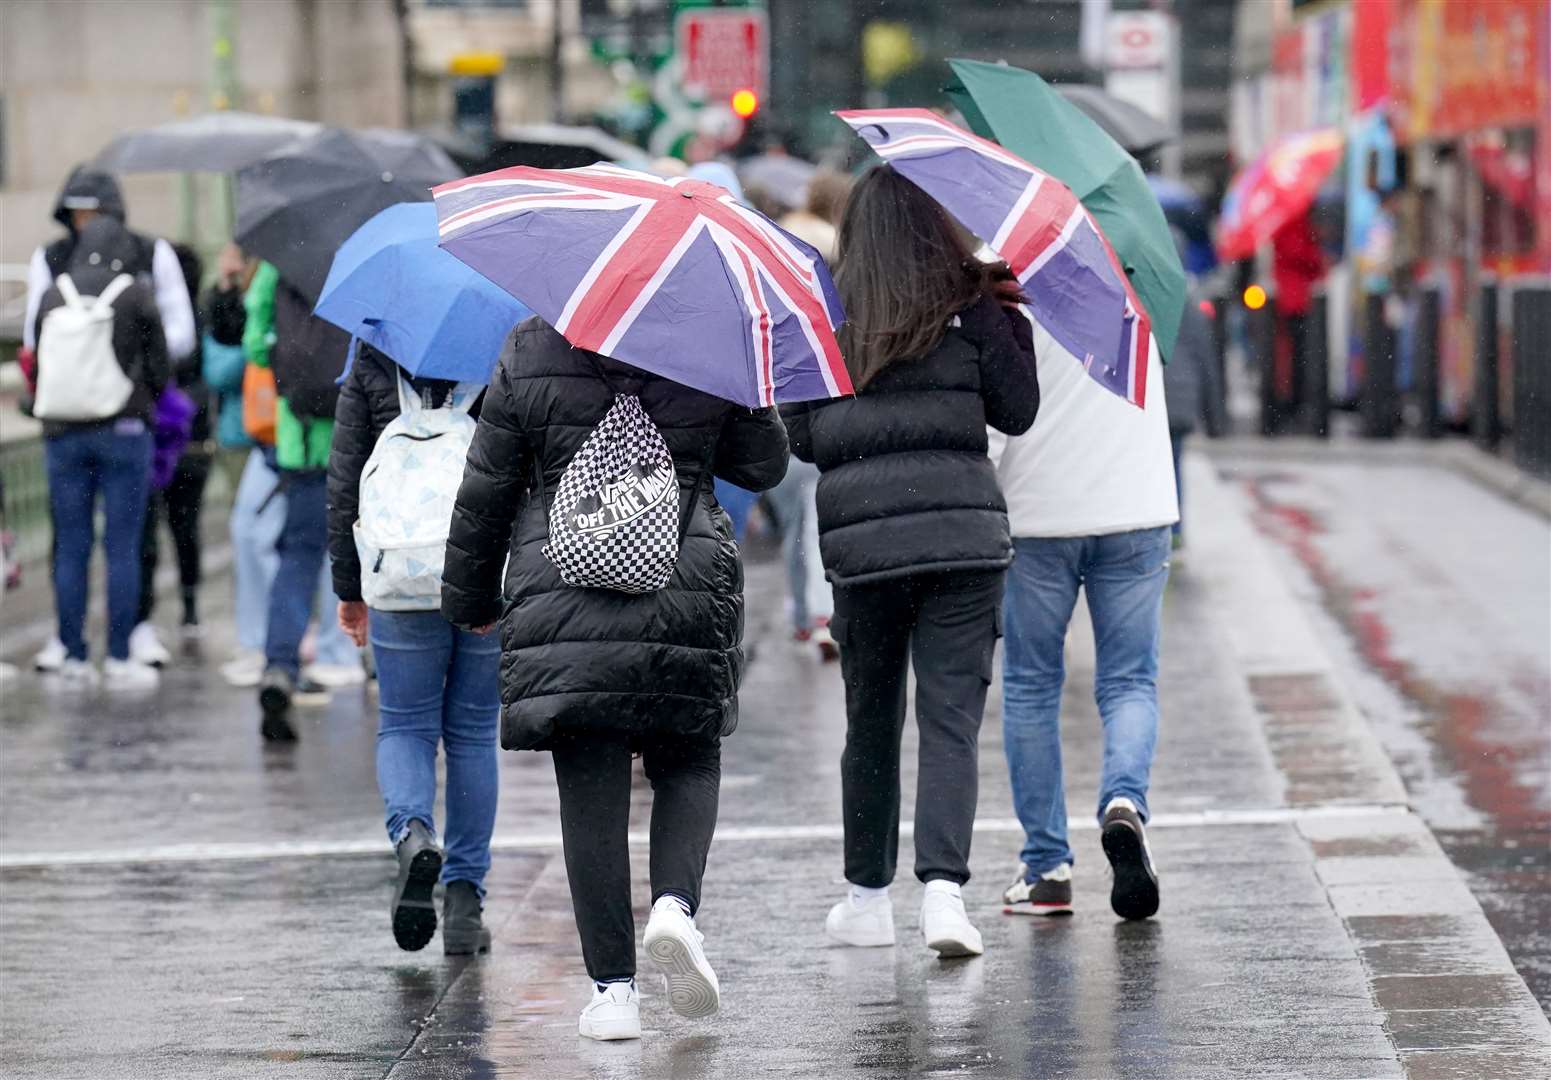 People enduring the rainy conditions (PA)